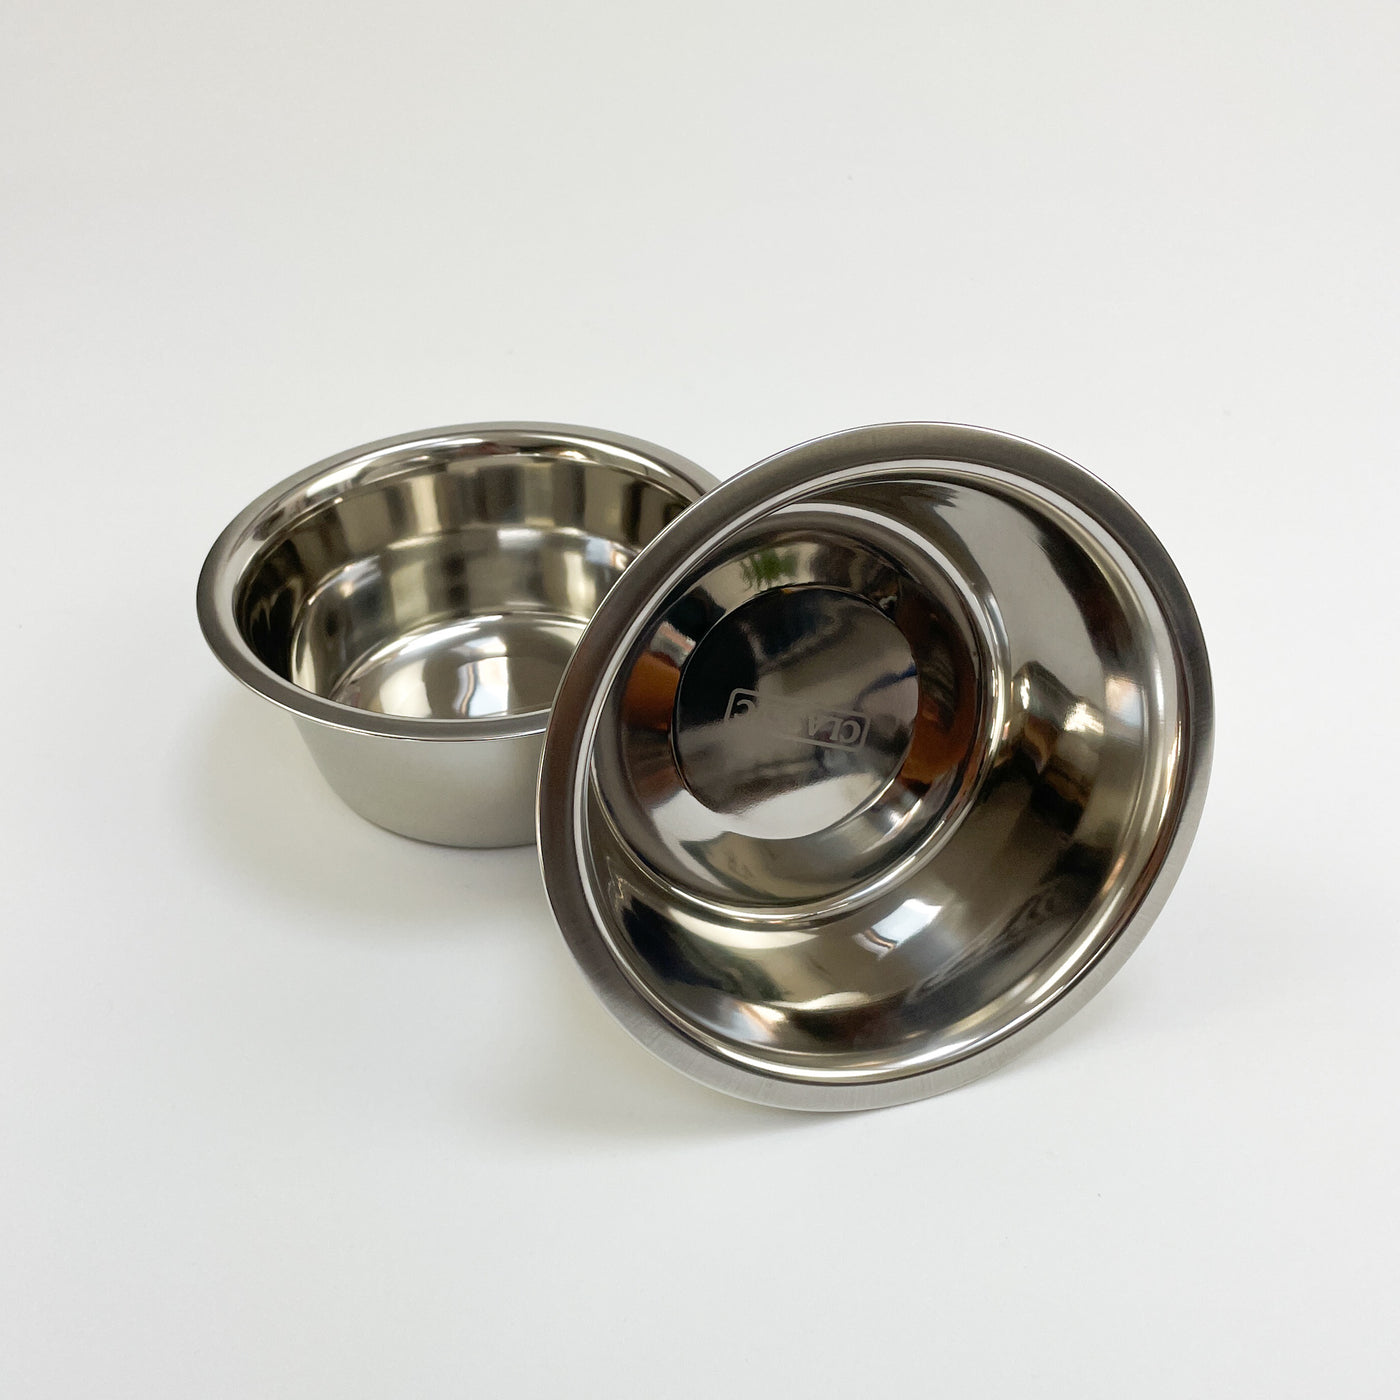 Medium sized stainless steels bowls to fit Albie's raised pet feeding stations.